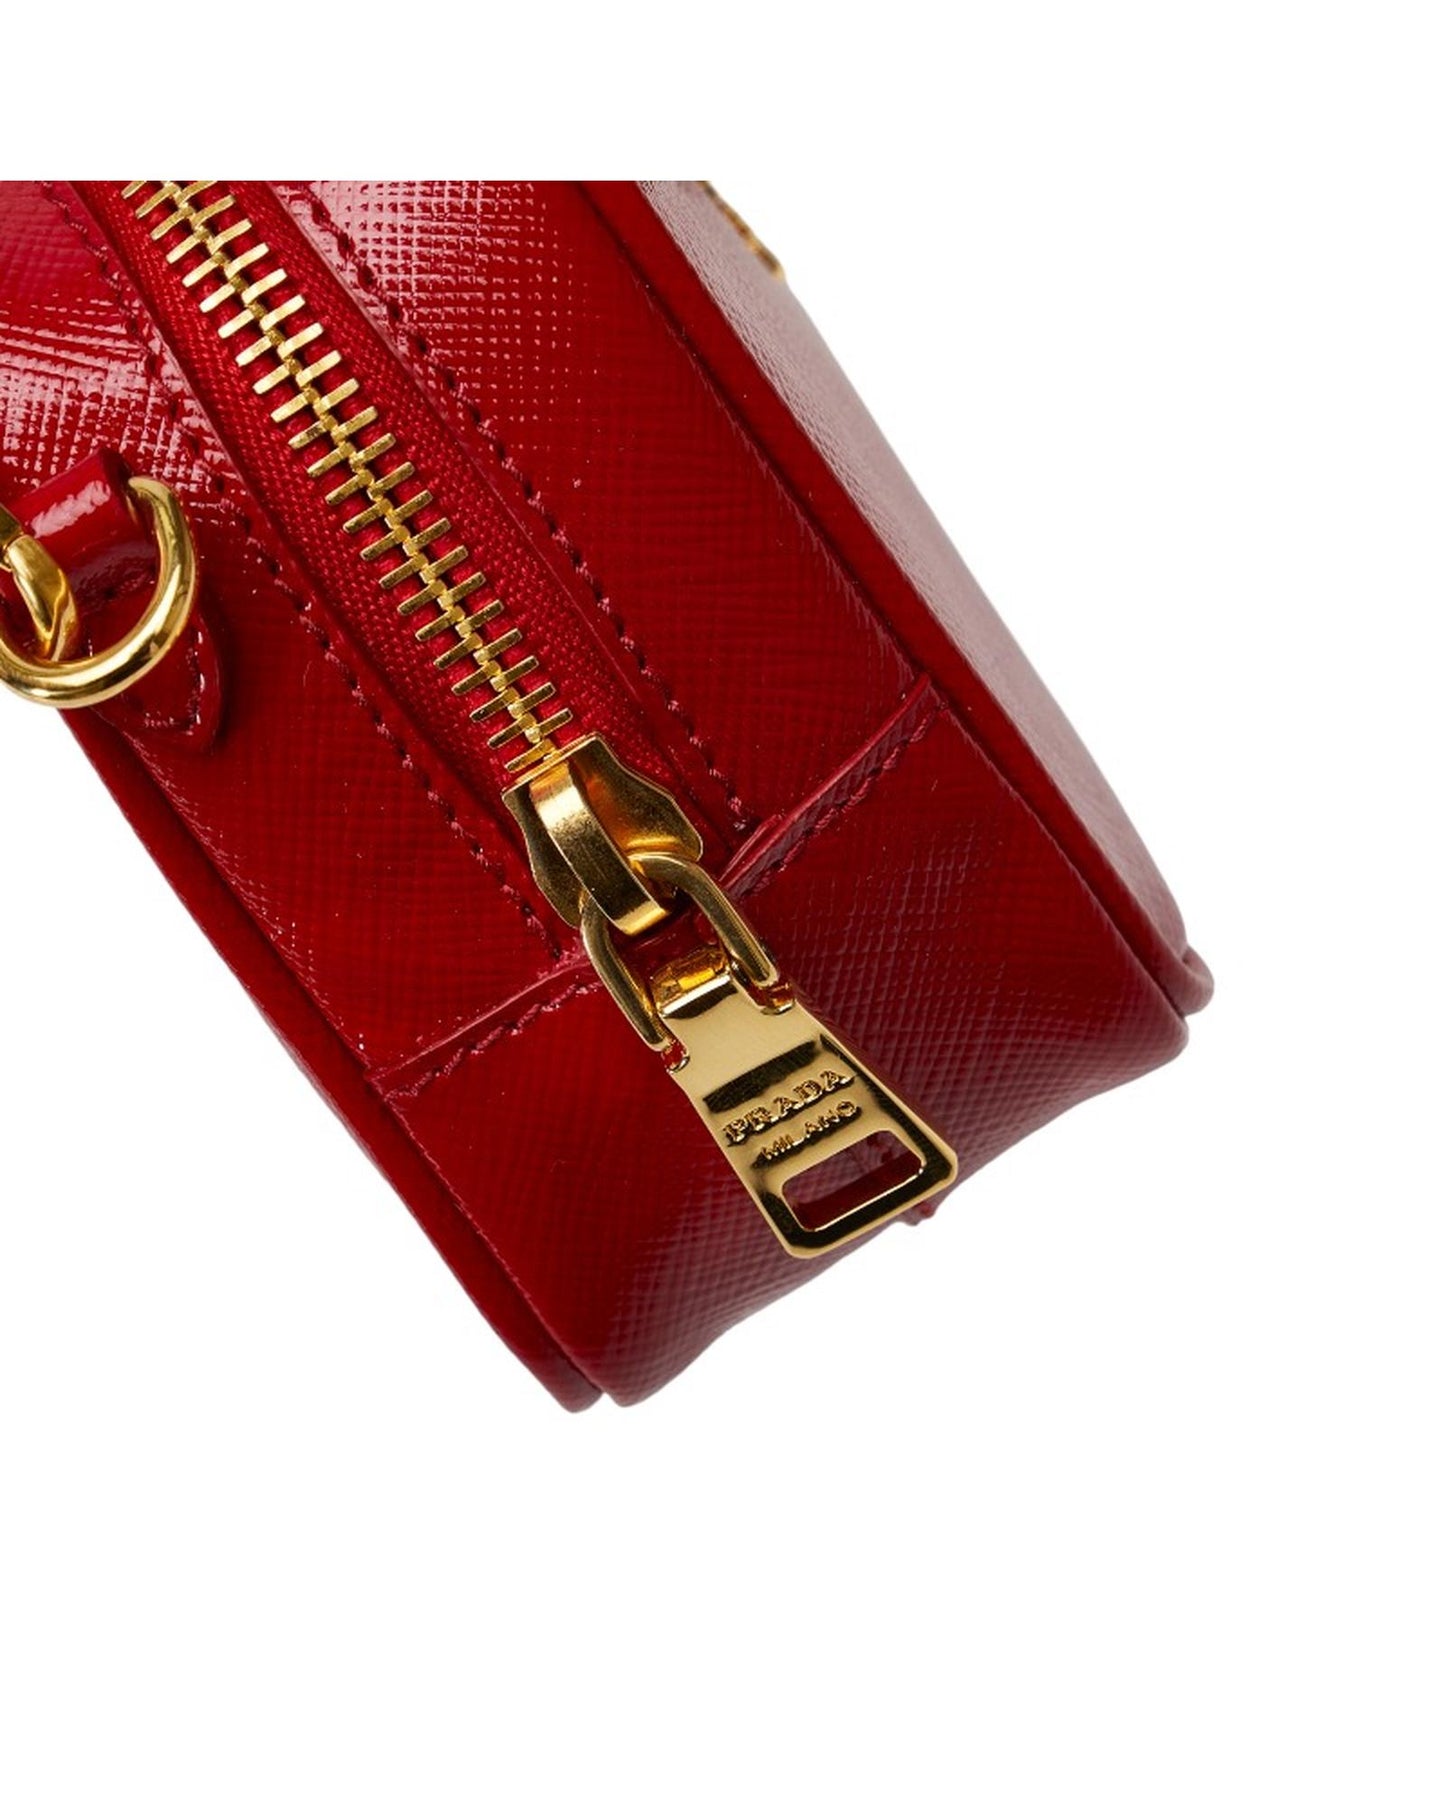 Prada Women's Red Vernice Bow Crossbody Bag in Excellent Condition in Red